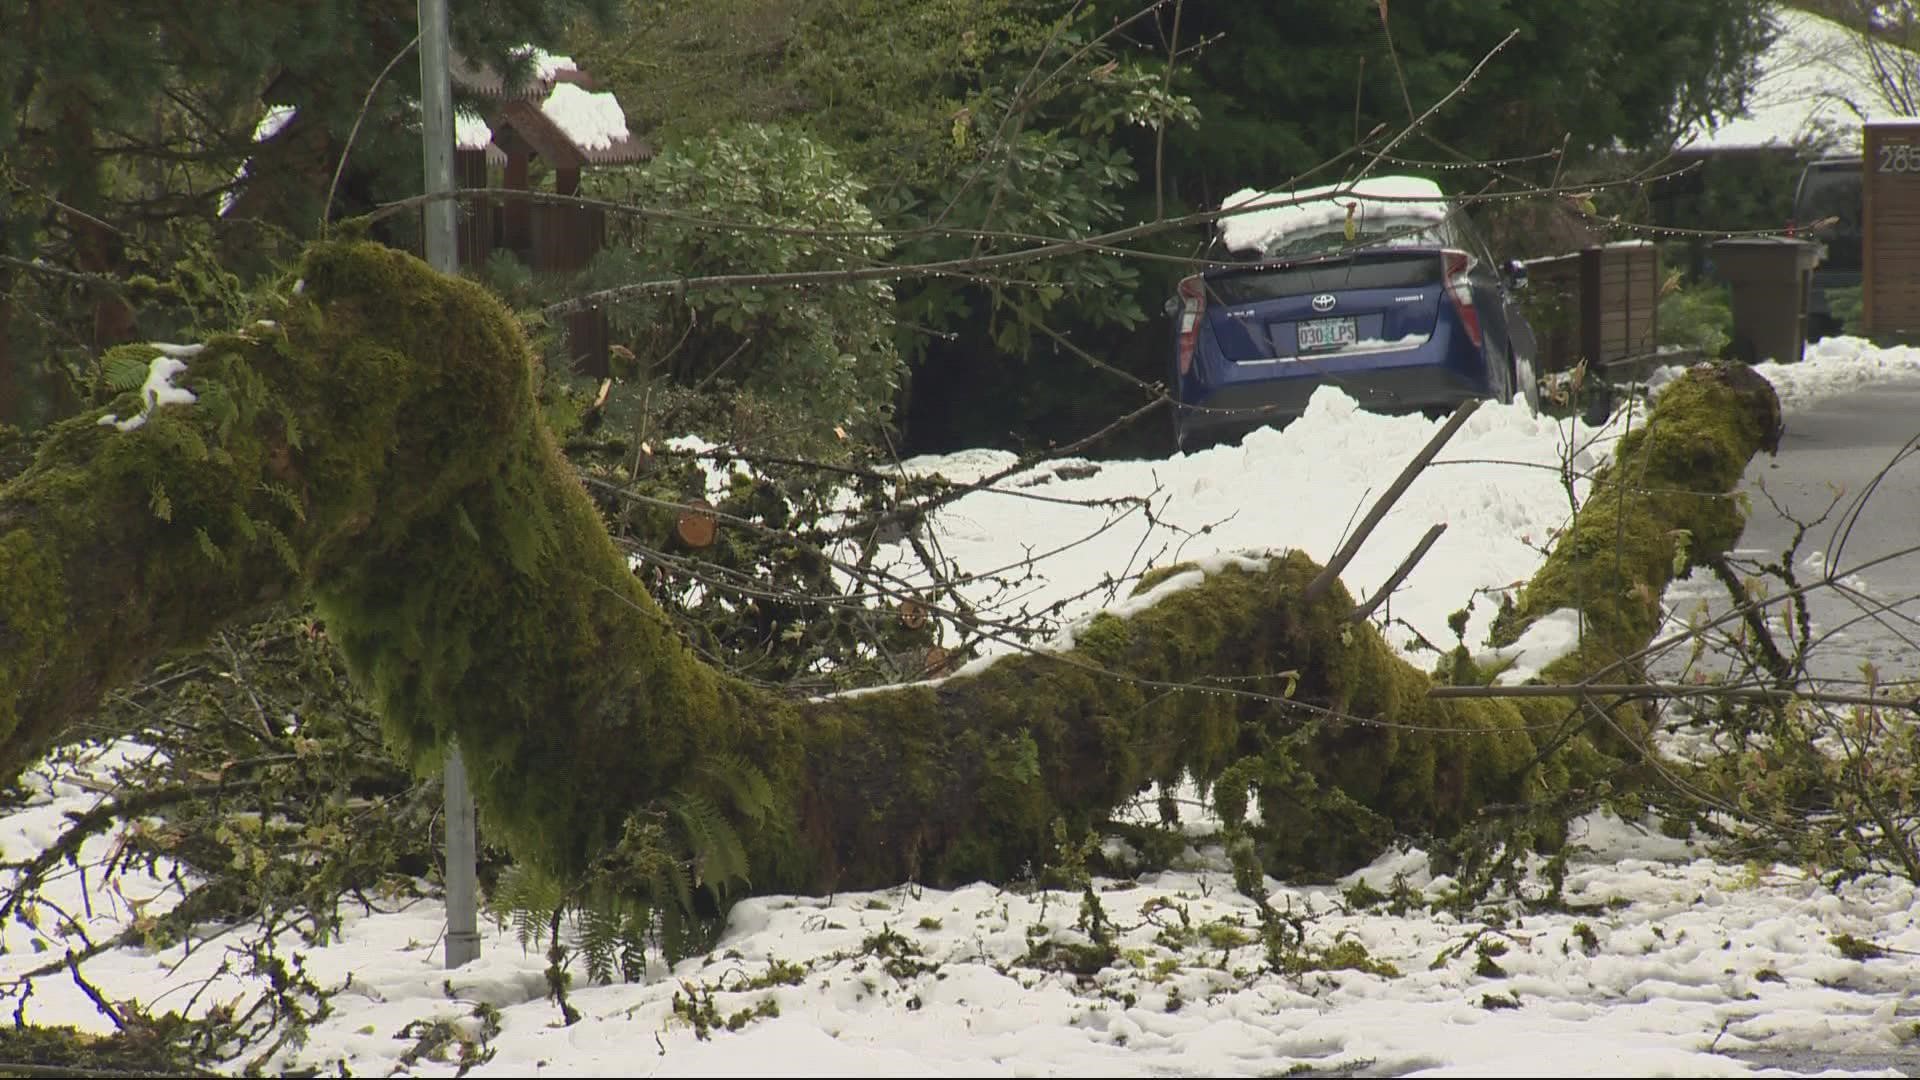 Hundreds of trees and branches fell following heavy snowfall in Portland on Monday, April 11. KGW's Mike Benner has the latest in cleanup efforts.